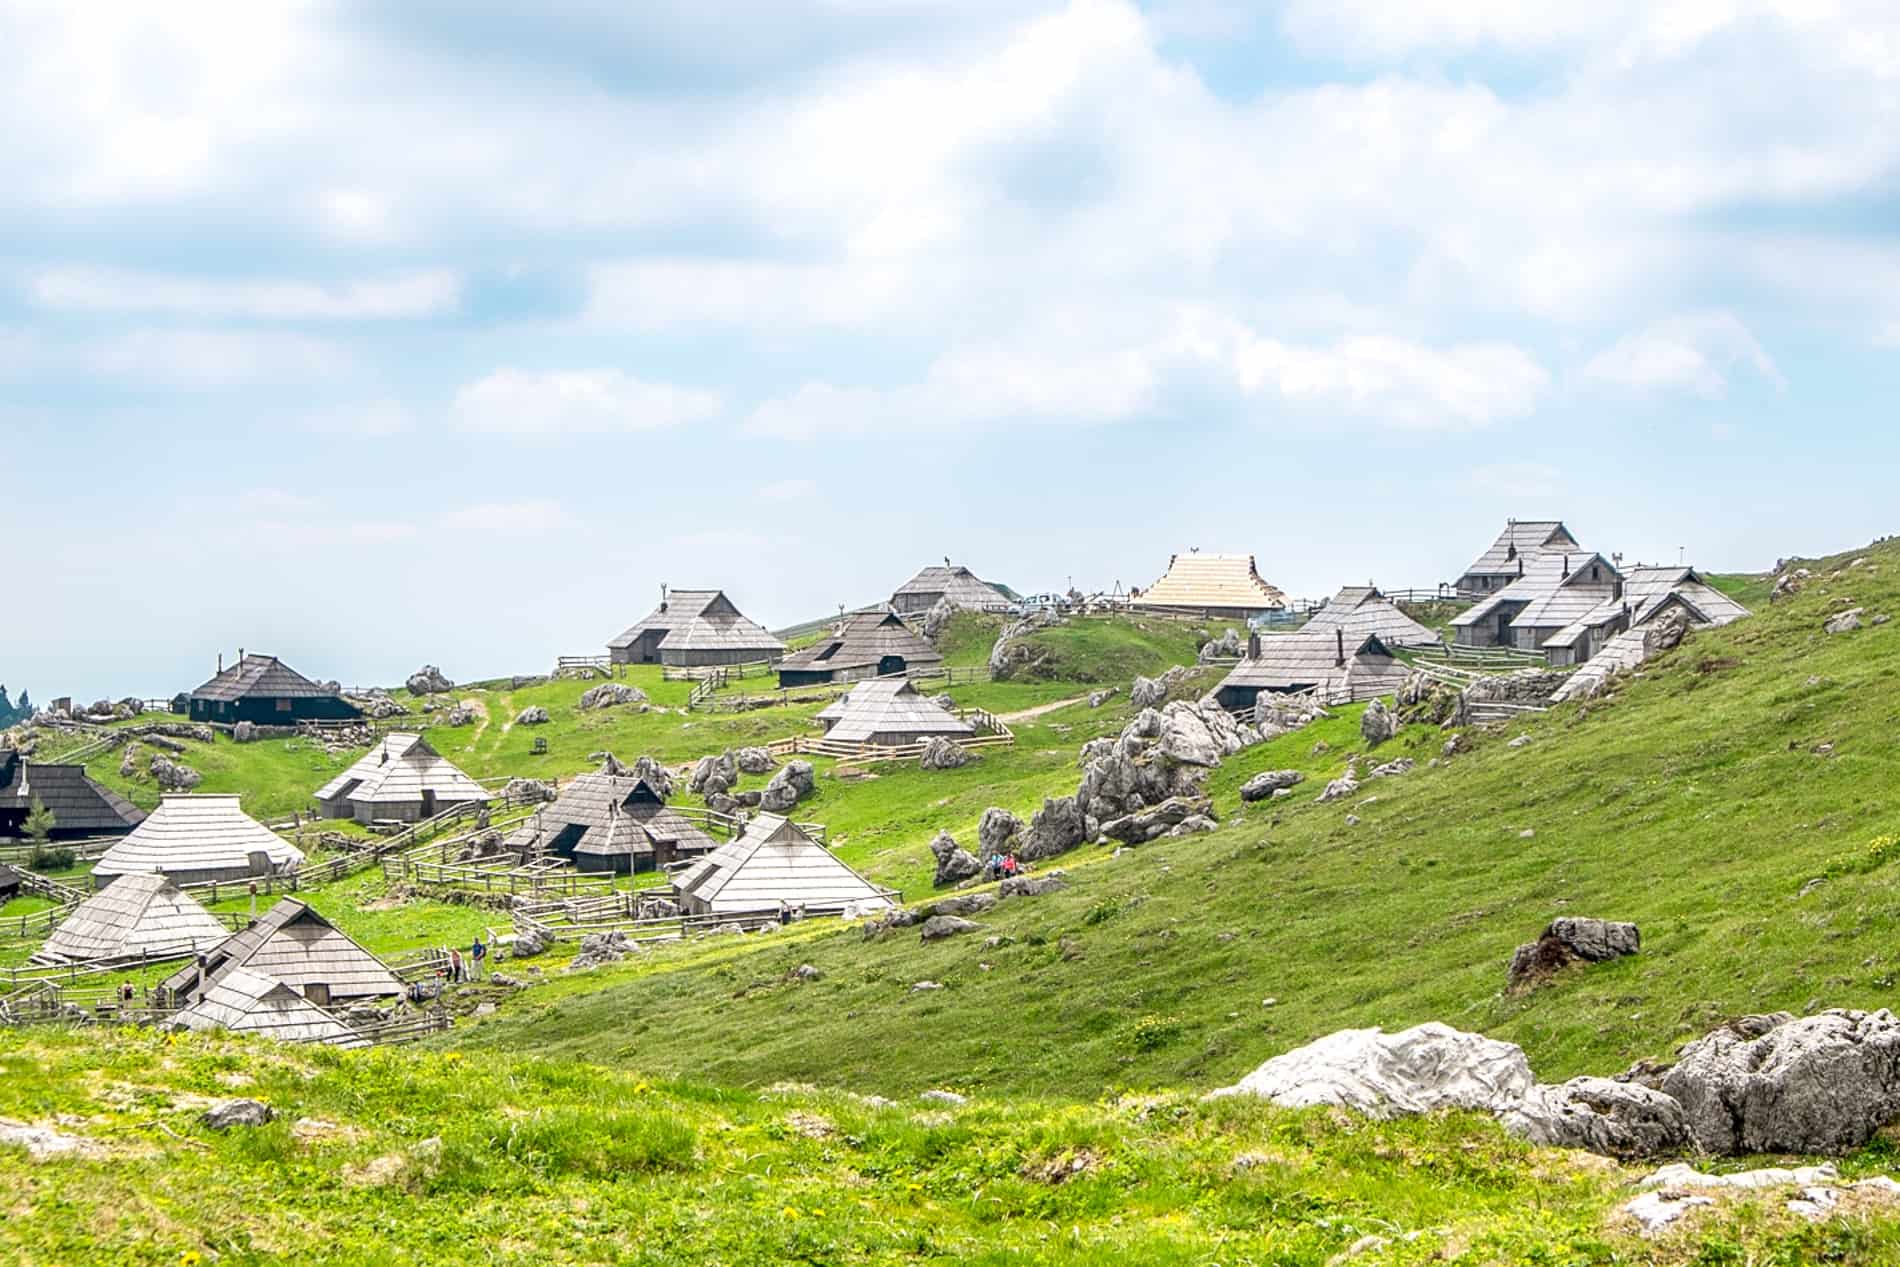 A Golden Roof amongst the distinct silvery houses in the Velika Planina mountaintop Shepherd Settlement in Slovenia. 